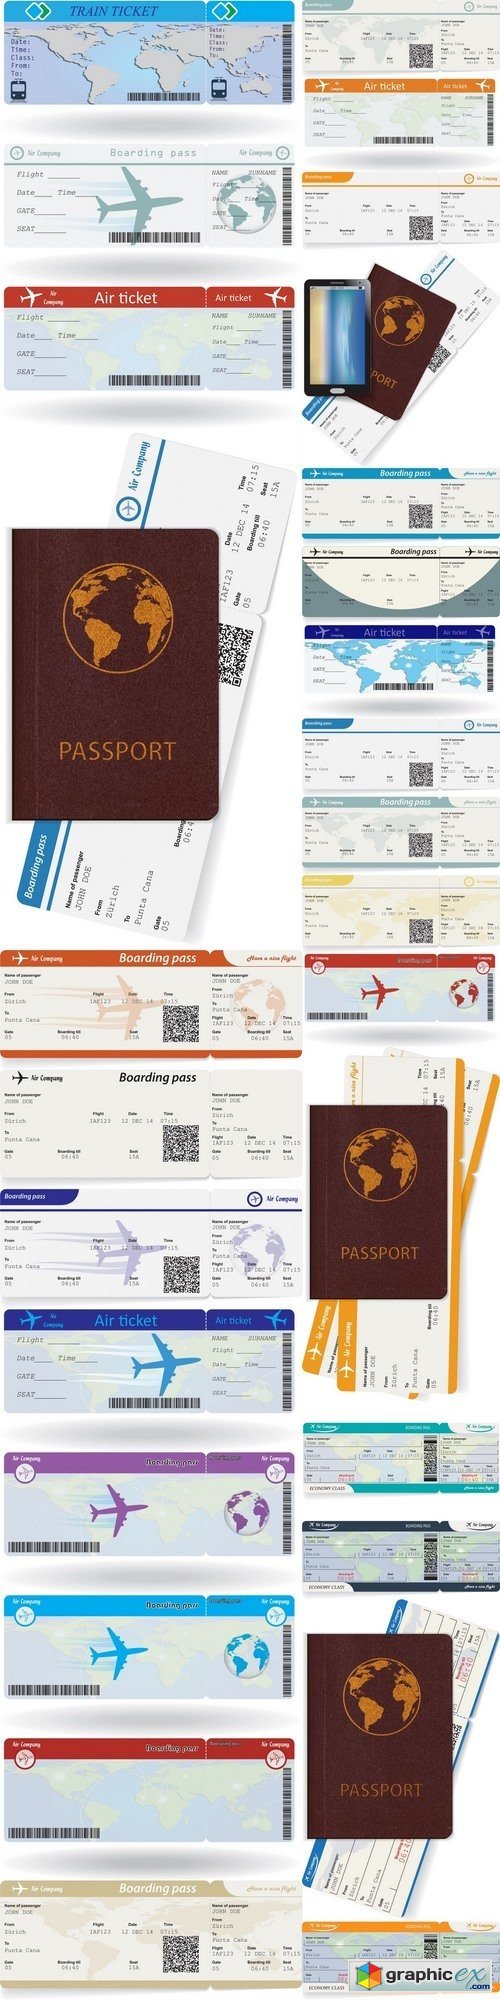 Illustration of airline boarding pass 2